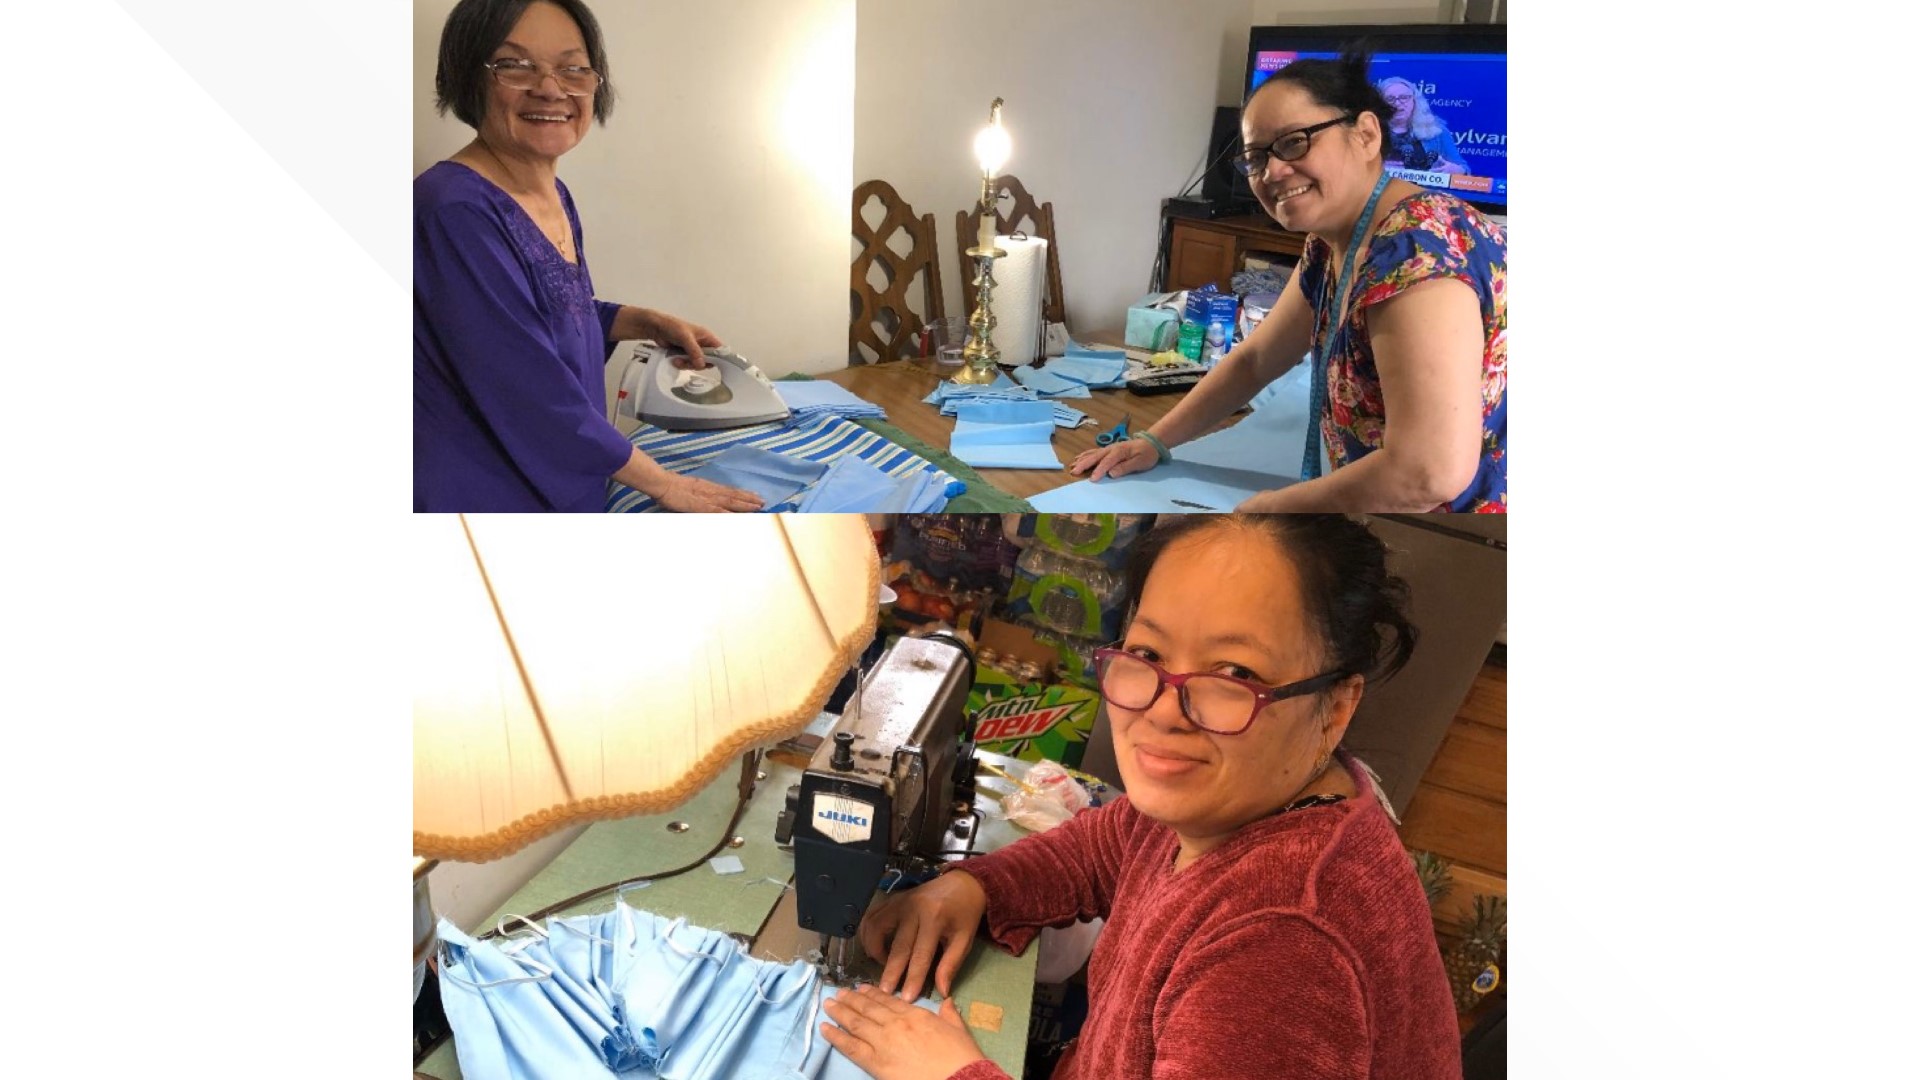 My Hanh Le, Thu Ha Le and Thu Hong Le are three sisters using their time off work to help medical workers in Wilkes-Barre